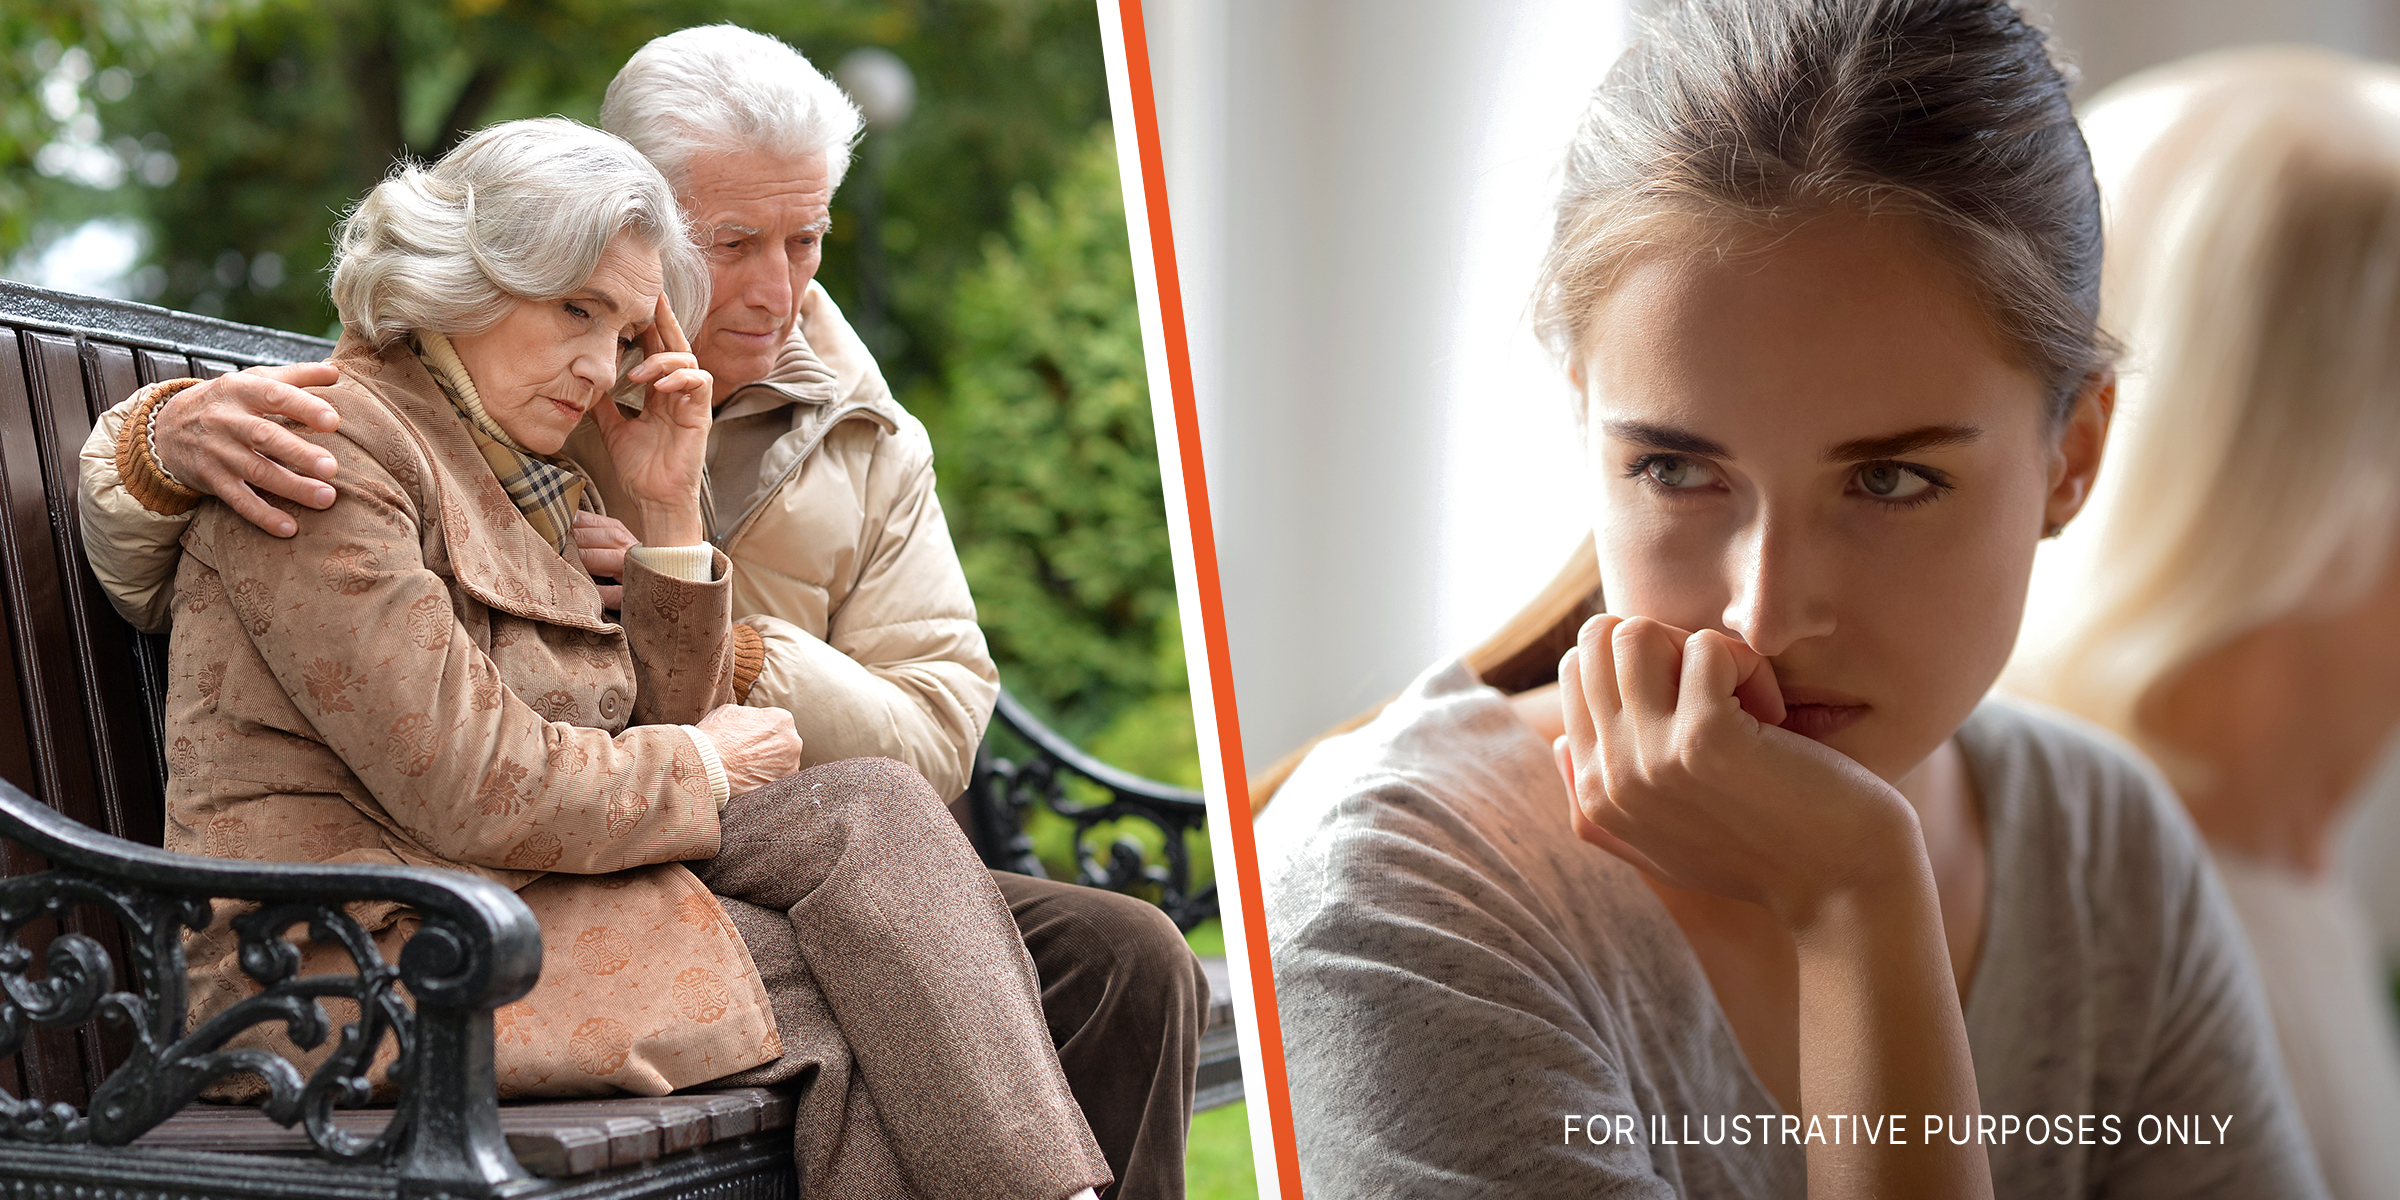 Elderly couple | Young, frustrated woman | Source: Shutterstock